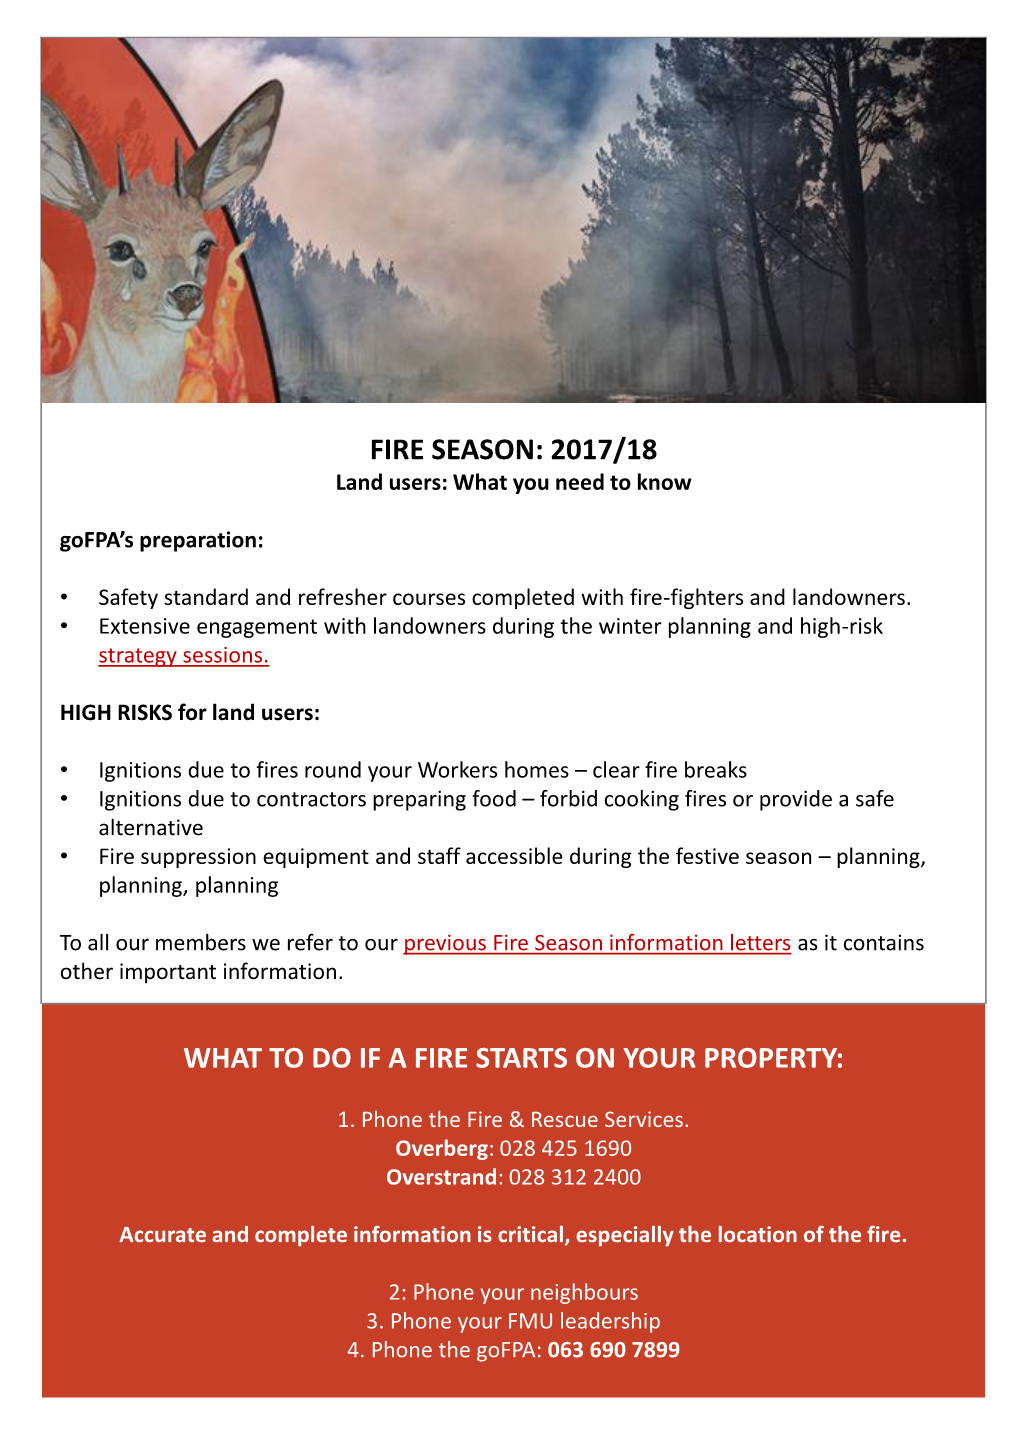 FIRE SEASON: 2017/18 Land Users: What You Need to Know Gofpa’S Preparation